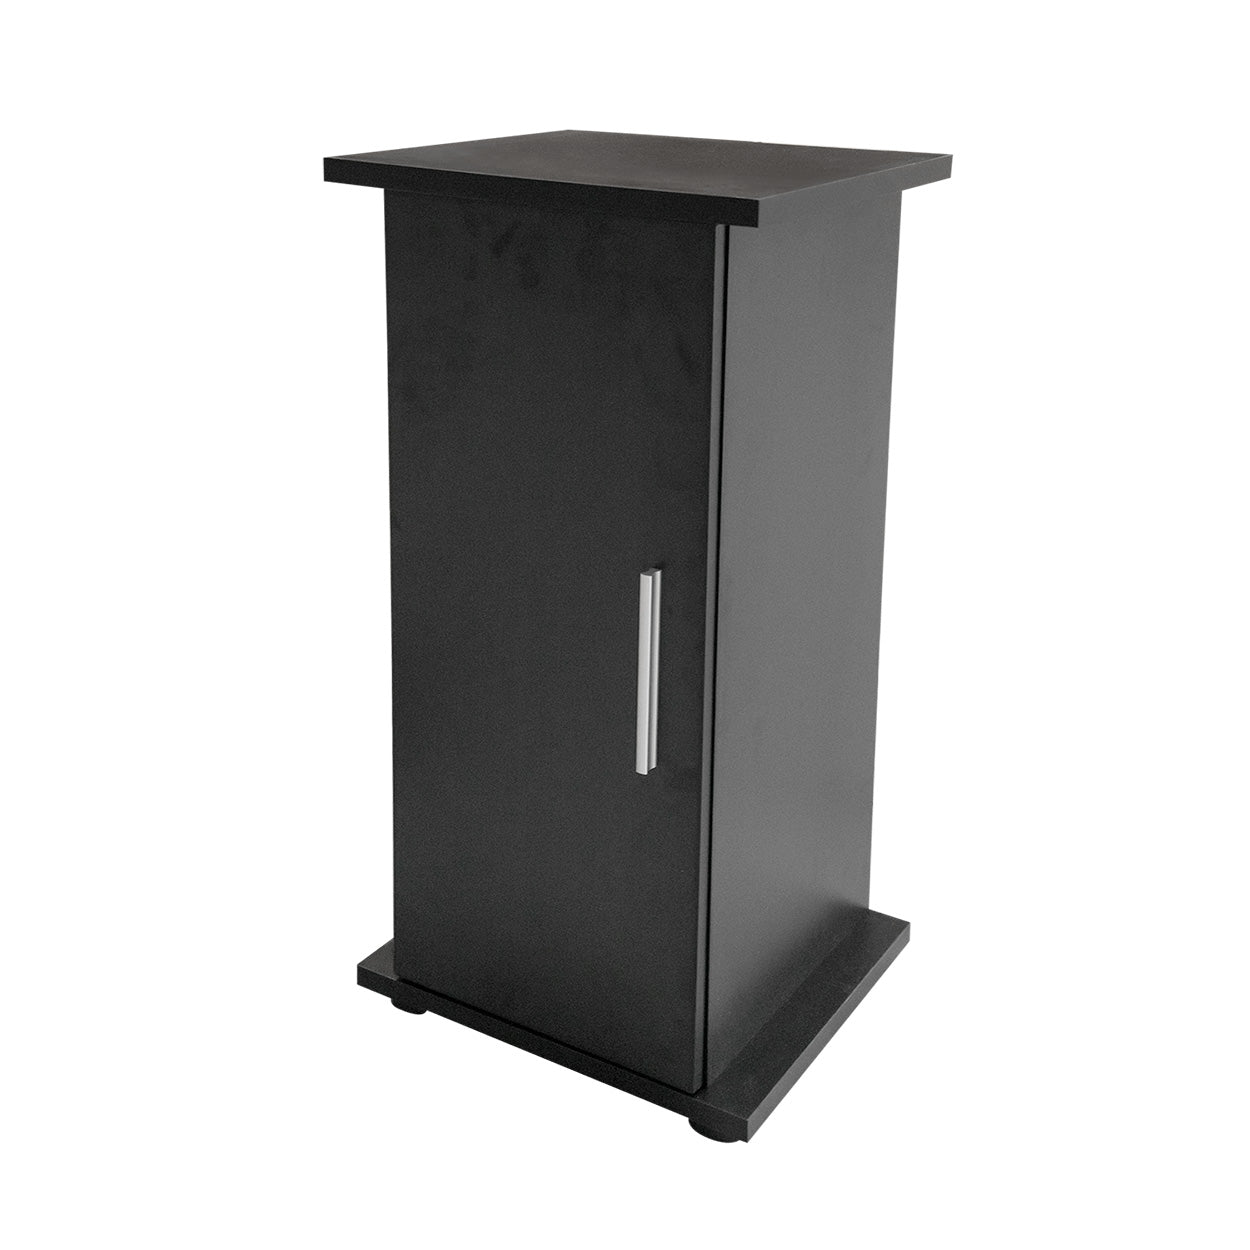 Seapora Empress Cabnit Stand - Black (Special Order Product)